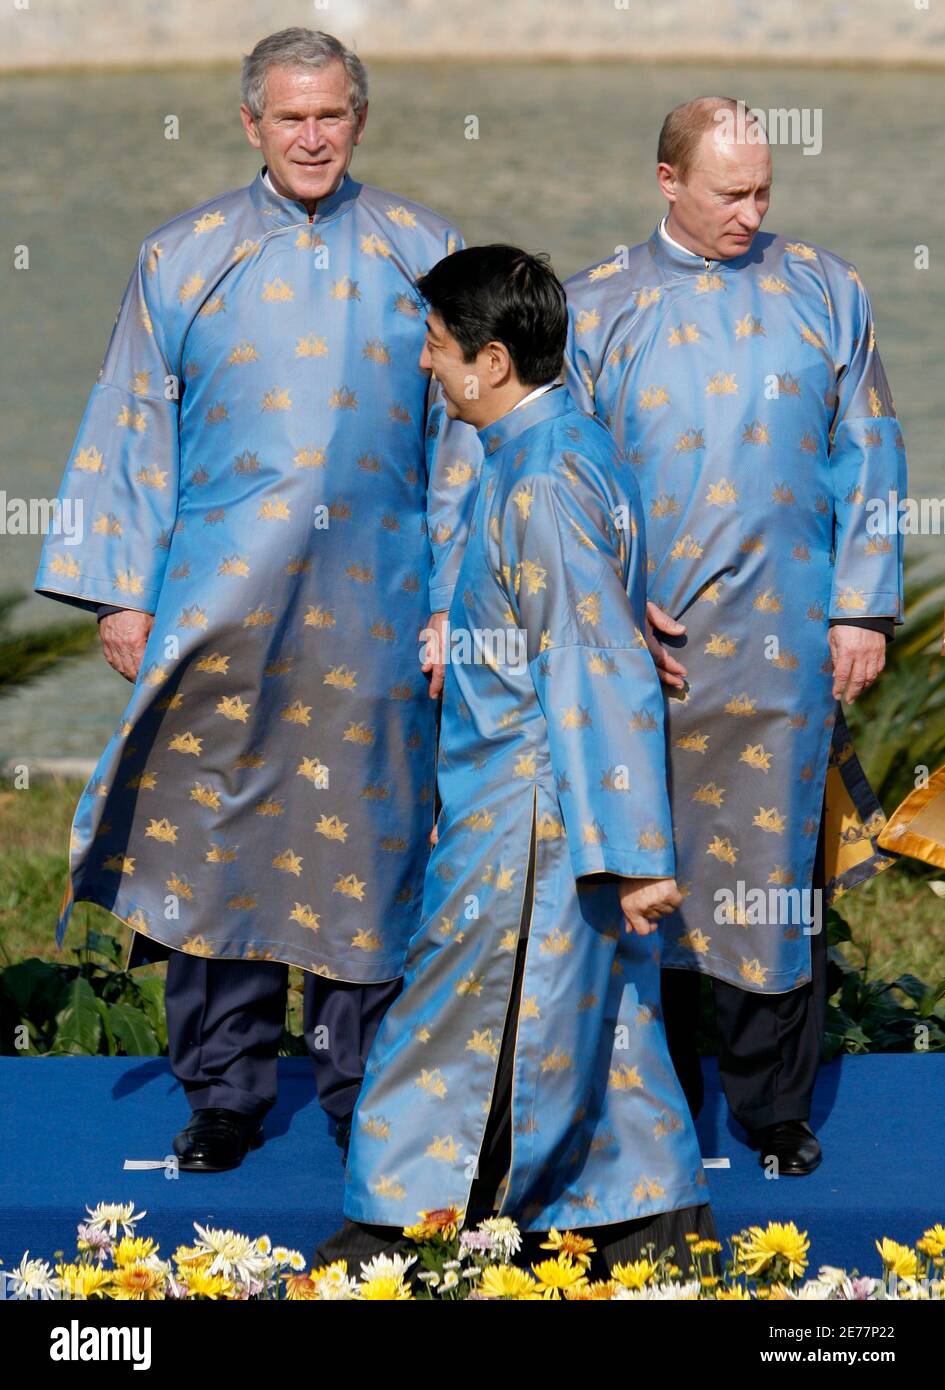 Japan's Prime Minister Shinzo Abe walks in front of U.S. President George W. Bush (L) and Russian President Vladimir Putin, wearing traditional Vietnamese clothes, known as the "ao dai", during the official photograph for the  the Asia-Pacific Economic Cooperation (APEC) Summit in Hanoi, November 19, 2006.  REUTERS/Jim Young   (VIETNAM) Stock Photo